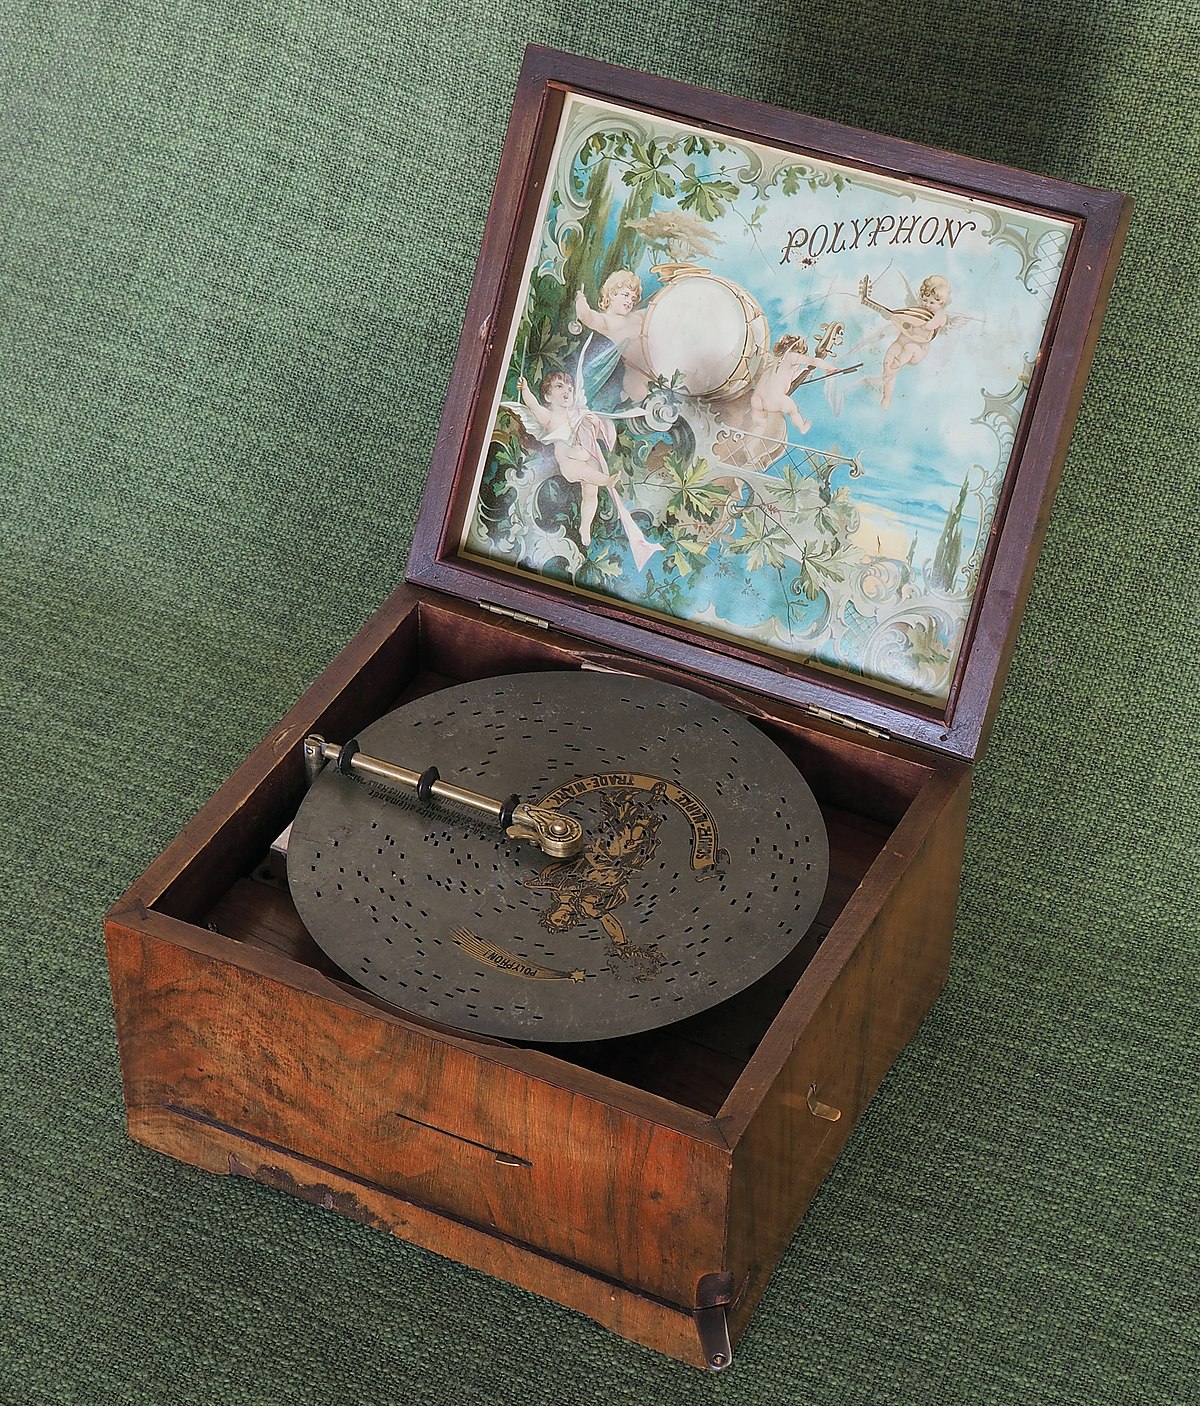 Make Your Own Music Box Set at The Music Stand